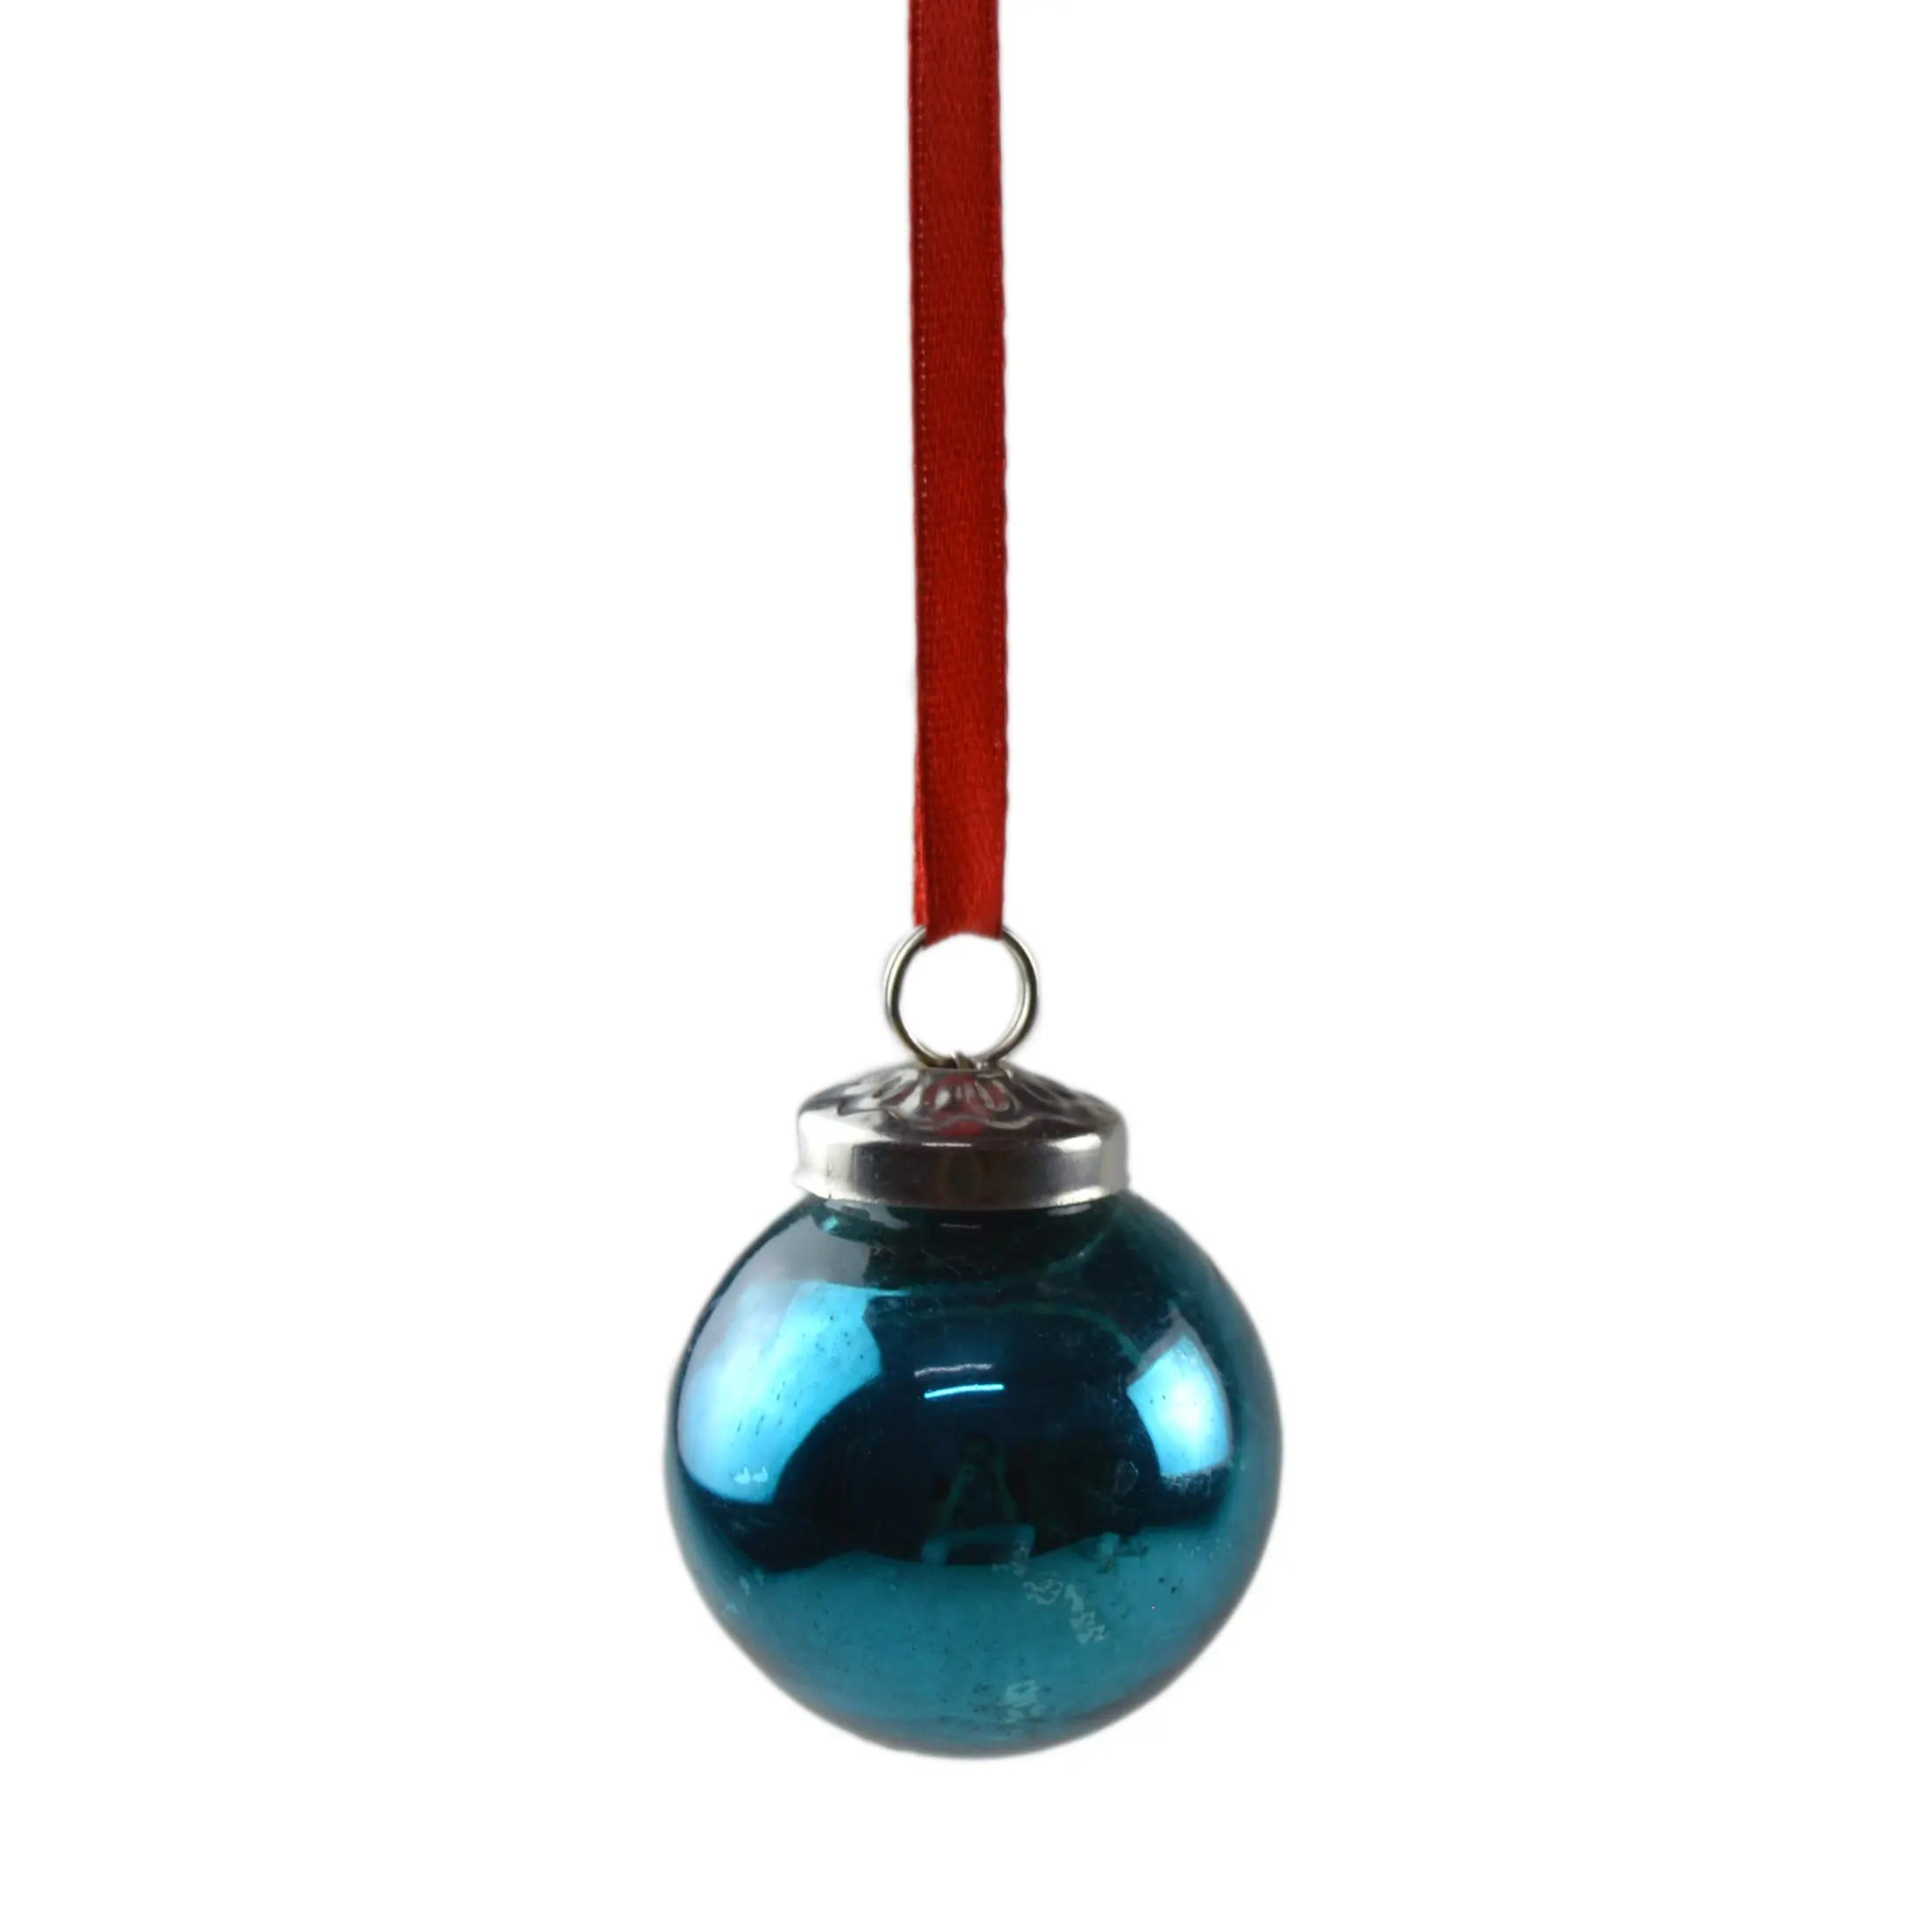 Hanging Ornament Ball For Home Function Decorative And Party Decor Christmas Hanging Ball Fresh Design